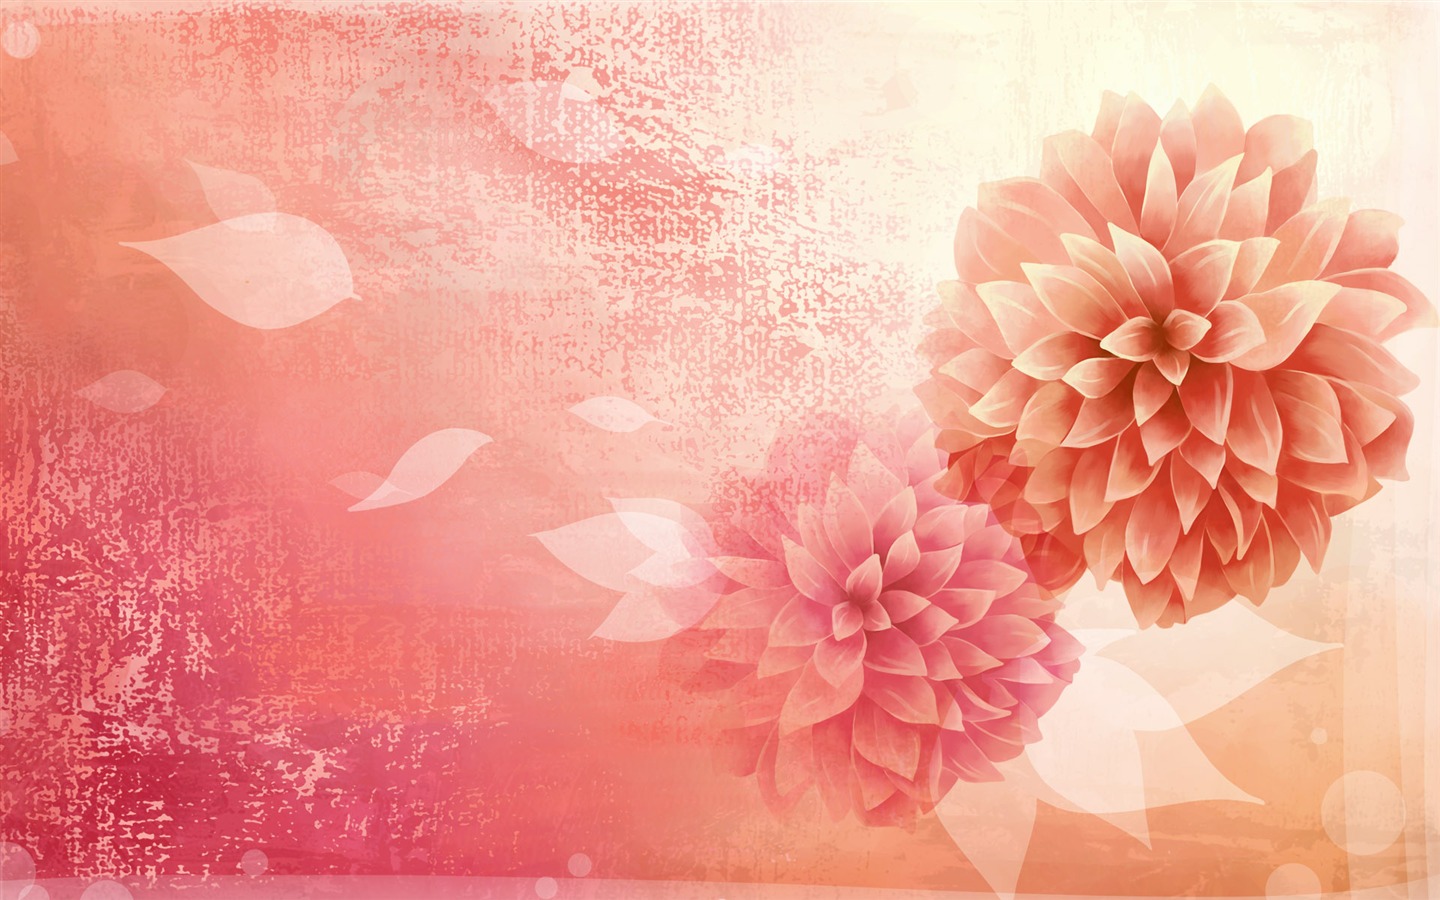 Synthetic Wallpaper Colorful Flower #22 - 1440x900